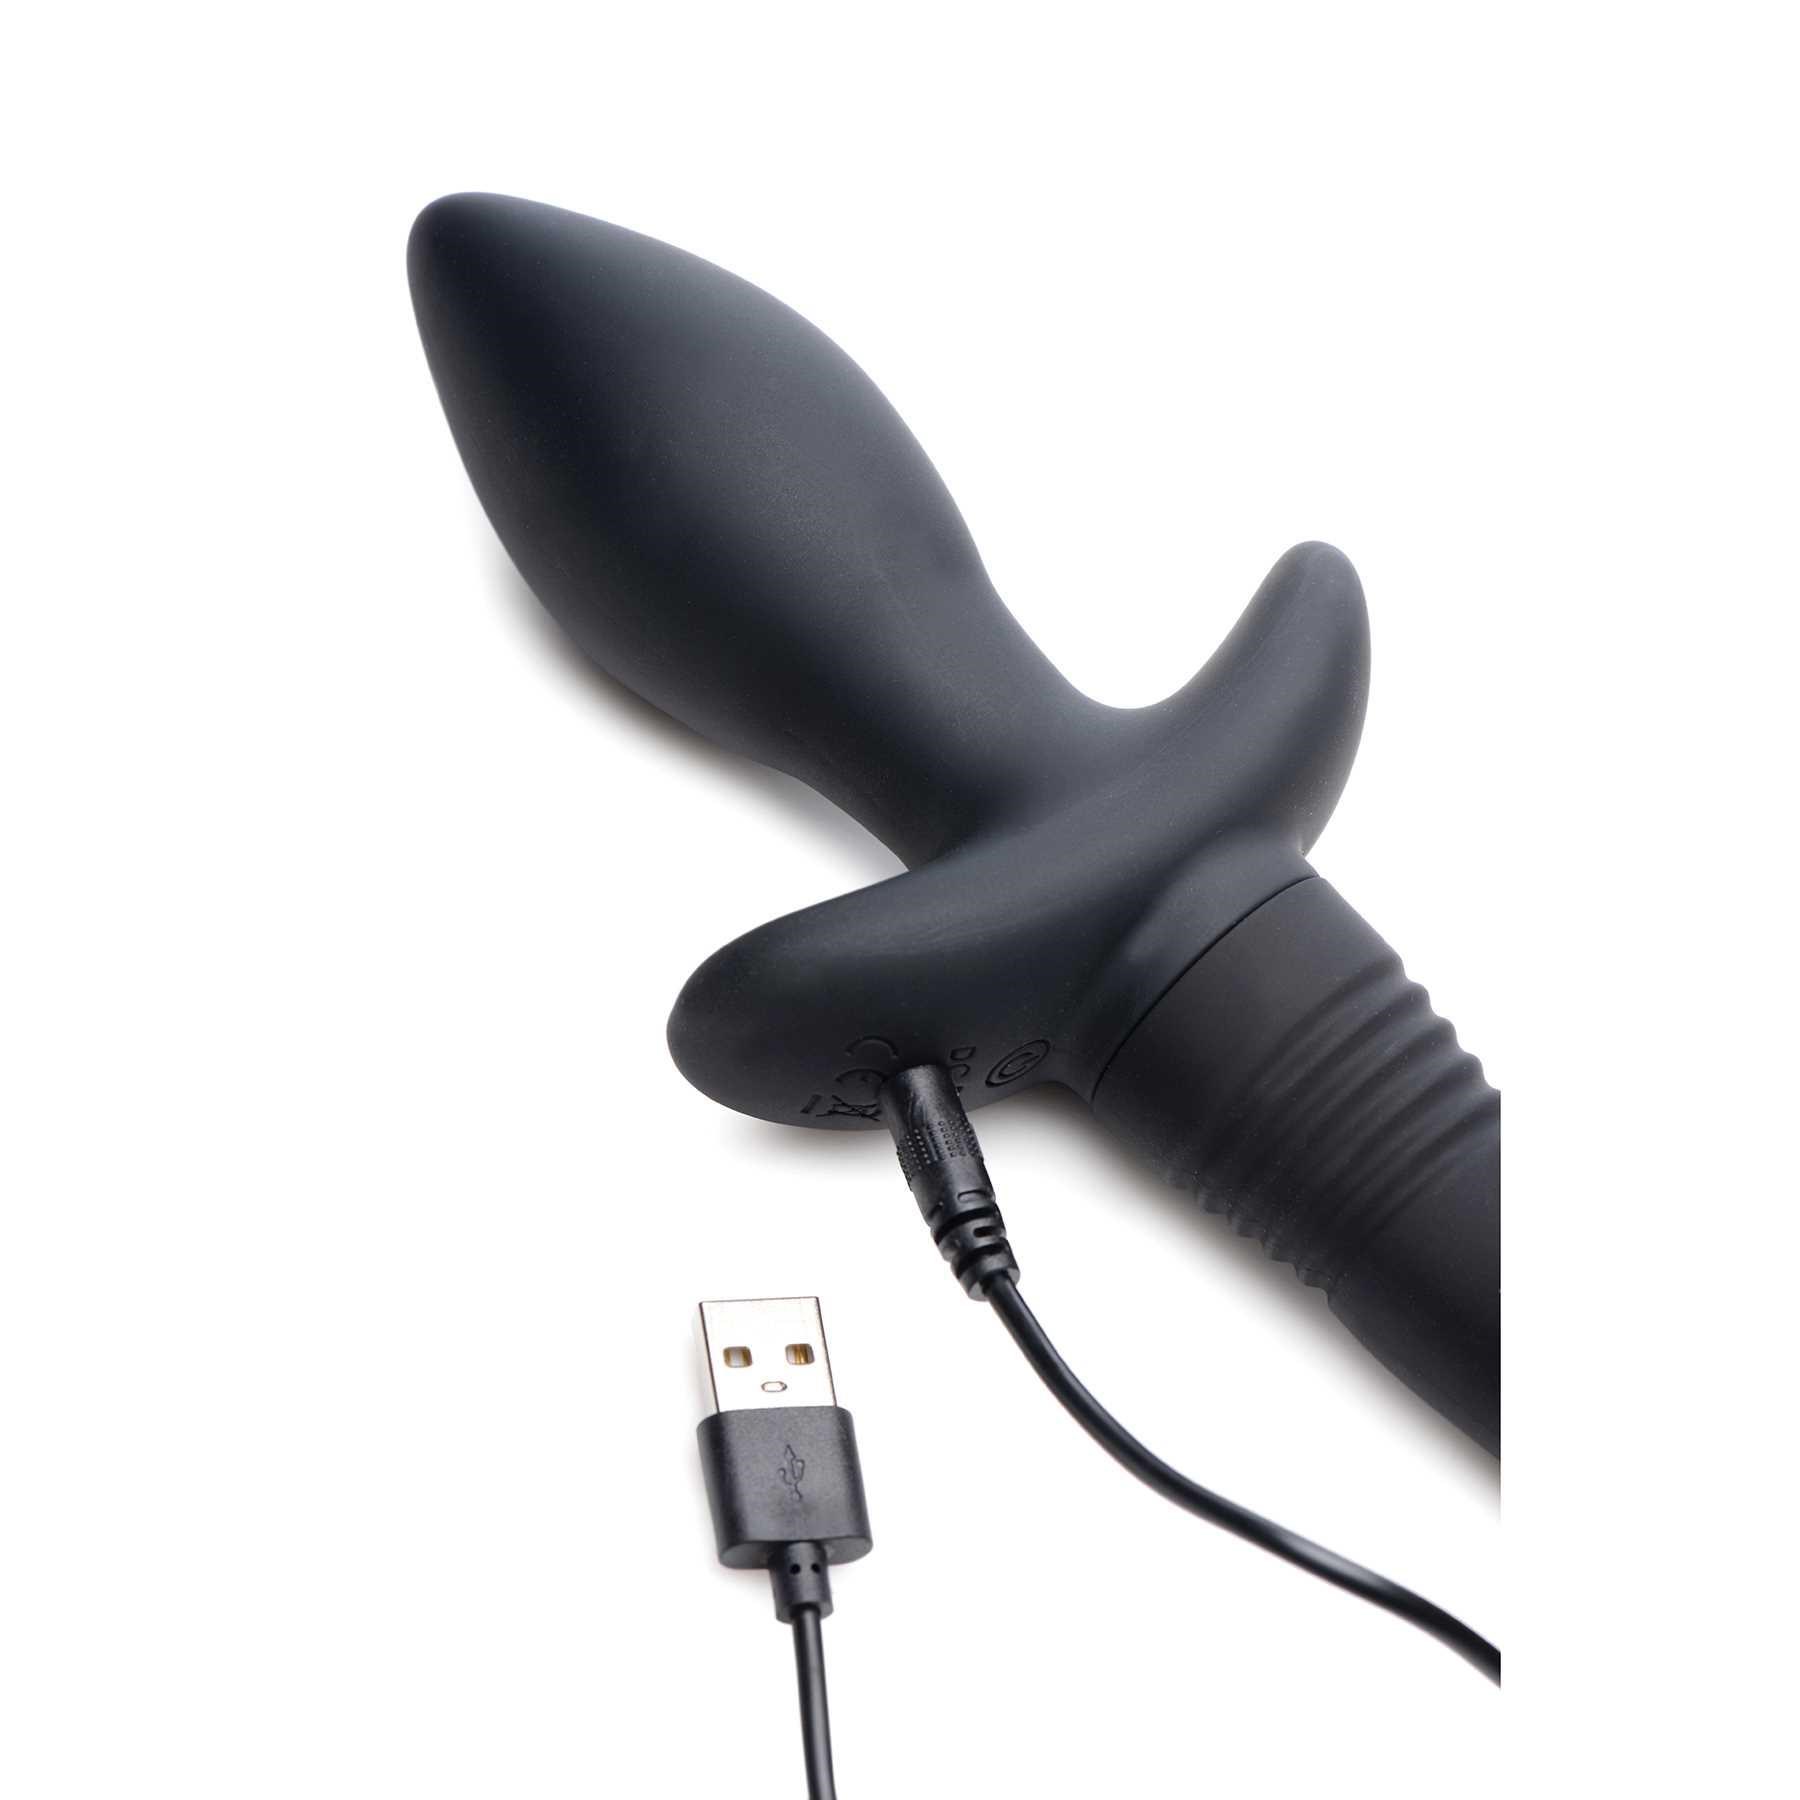 Wagging & Vibrating Puppy Tail Anal Plug with USB charger plugged into toy